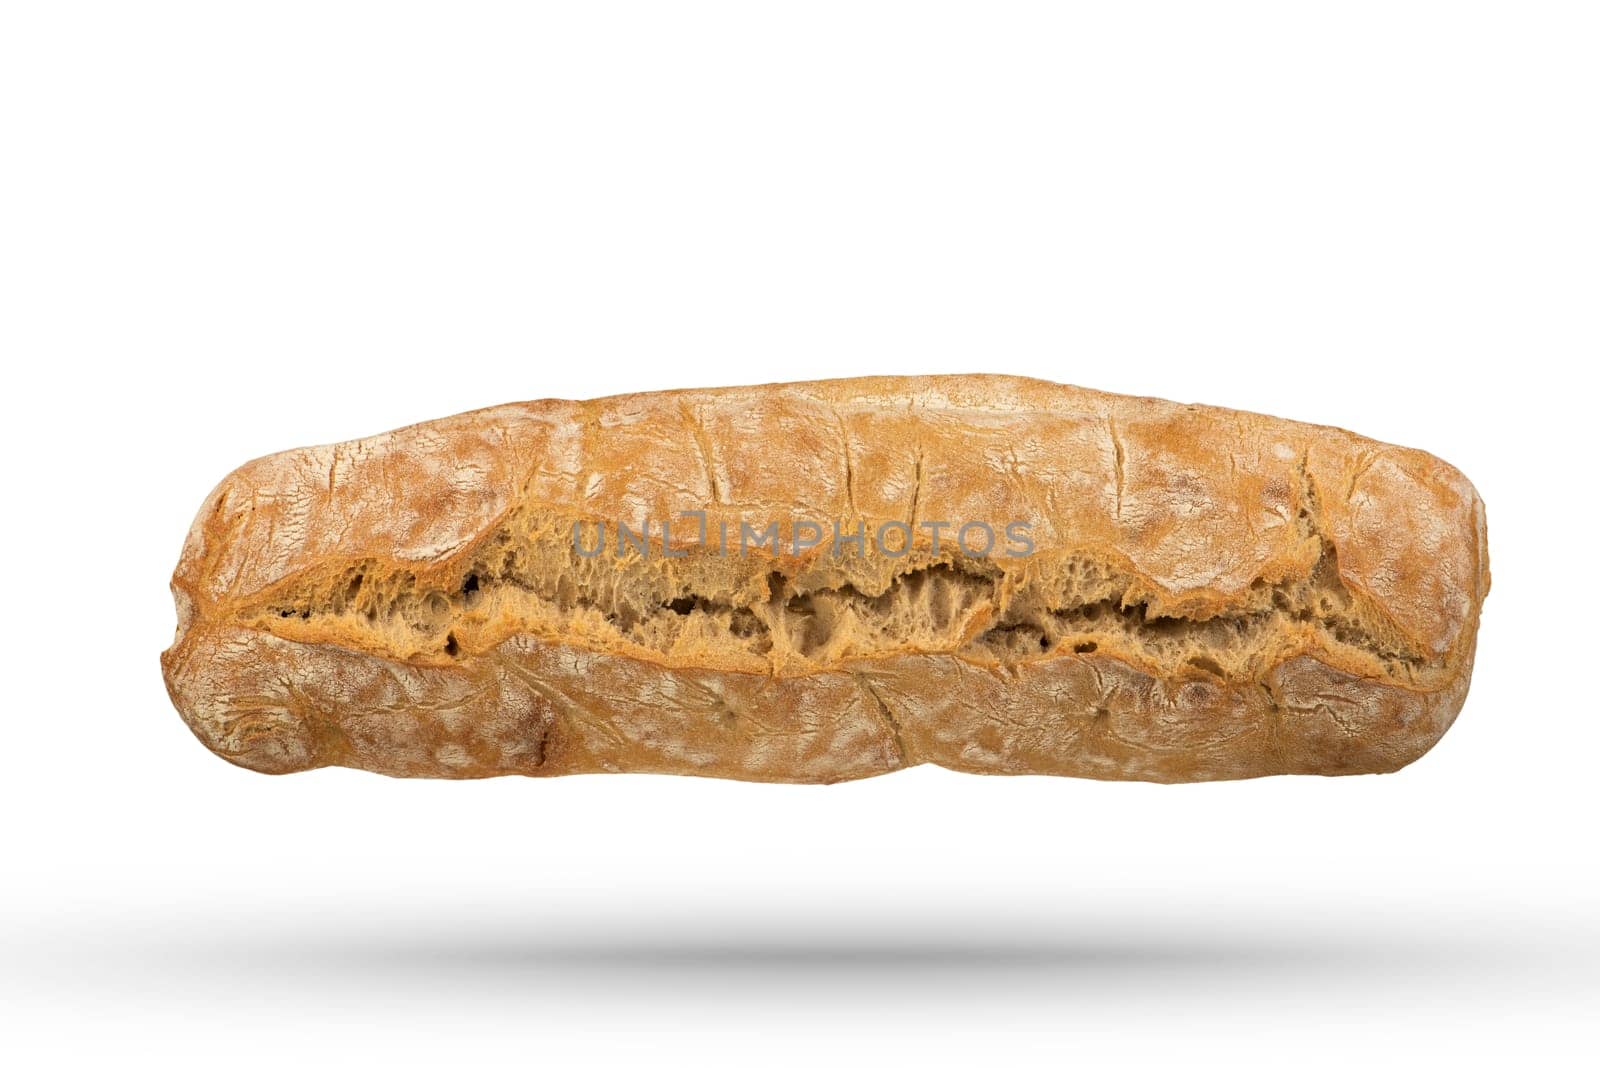 Loaf of Italian fresh ciabatta bread on a white isolated background. Loaf of bread isolate to insert into a design or project. Top view. High quality photo